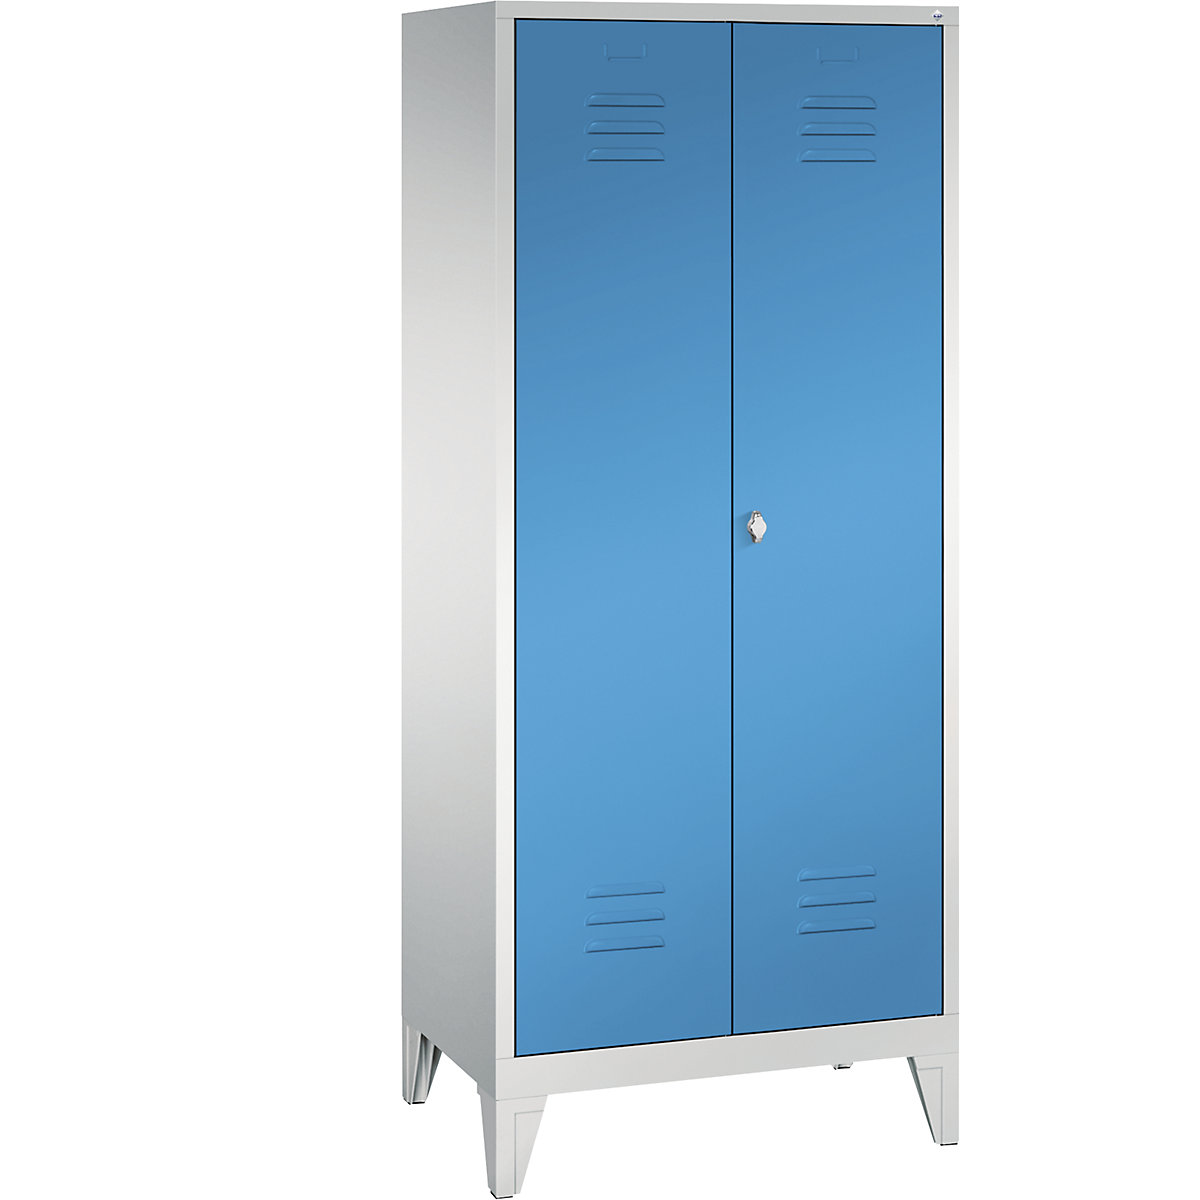 CLASSIC storage cupboard with feet, doors close in the middle – C+P, 2 compartments, compartment width 400 mm, light grey / light blue-4